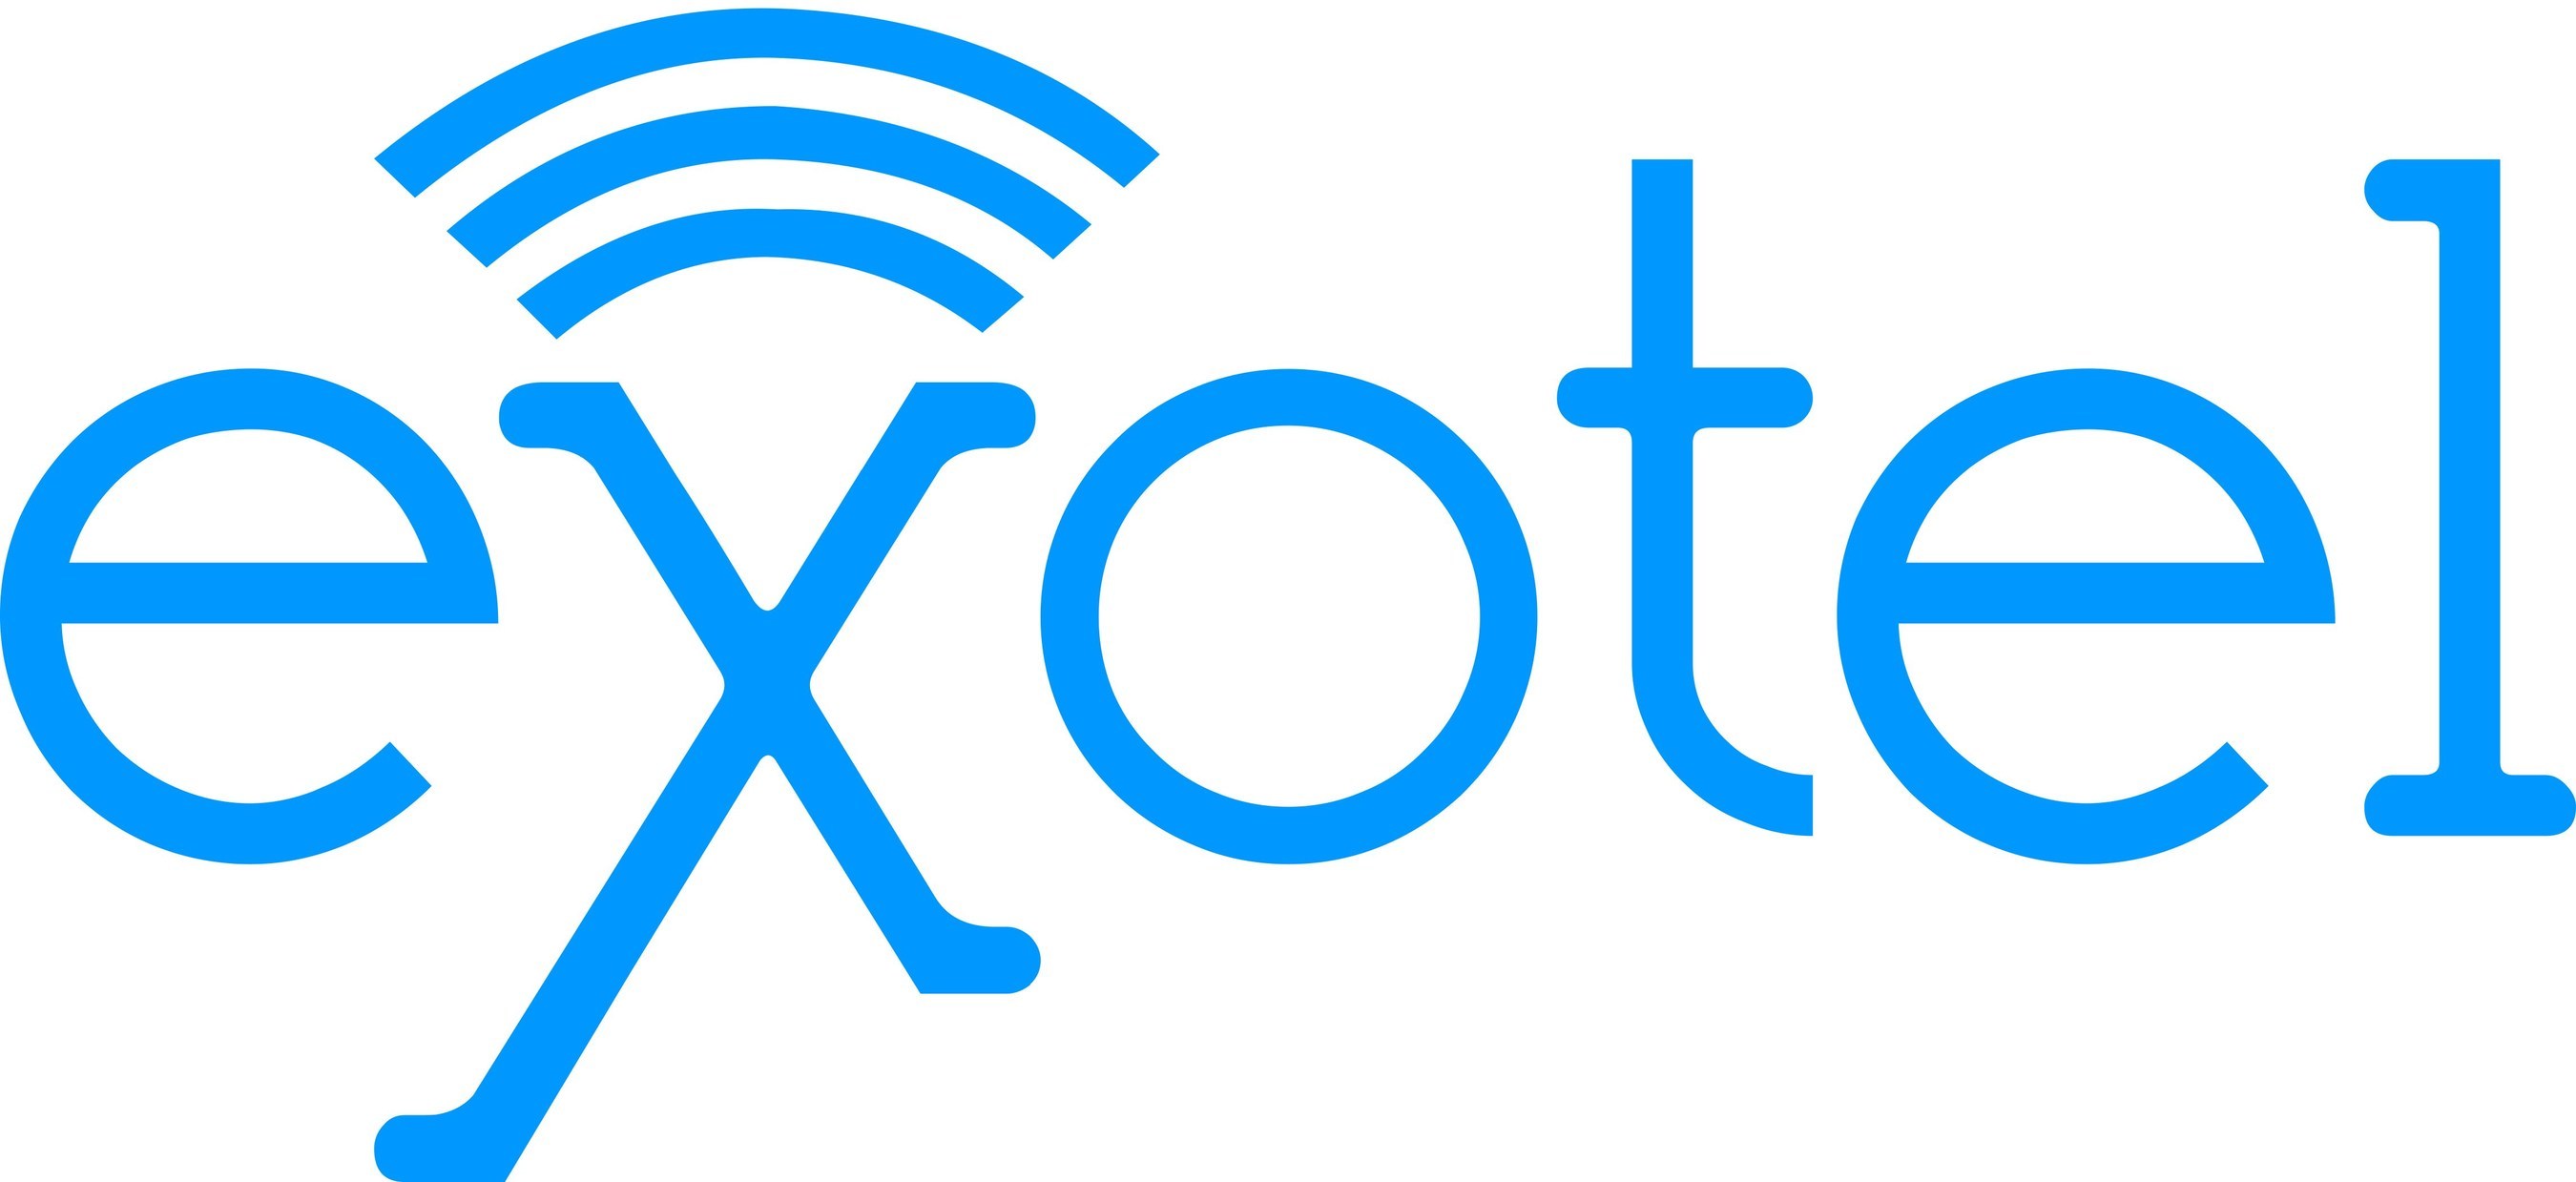  Exotel  Helps Move Large Call Centres to the Cloud Boosts 